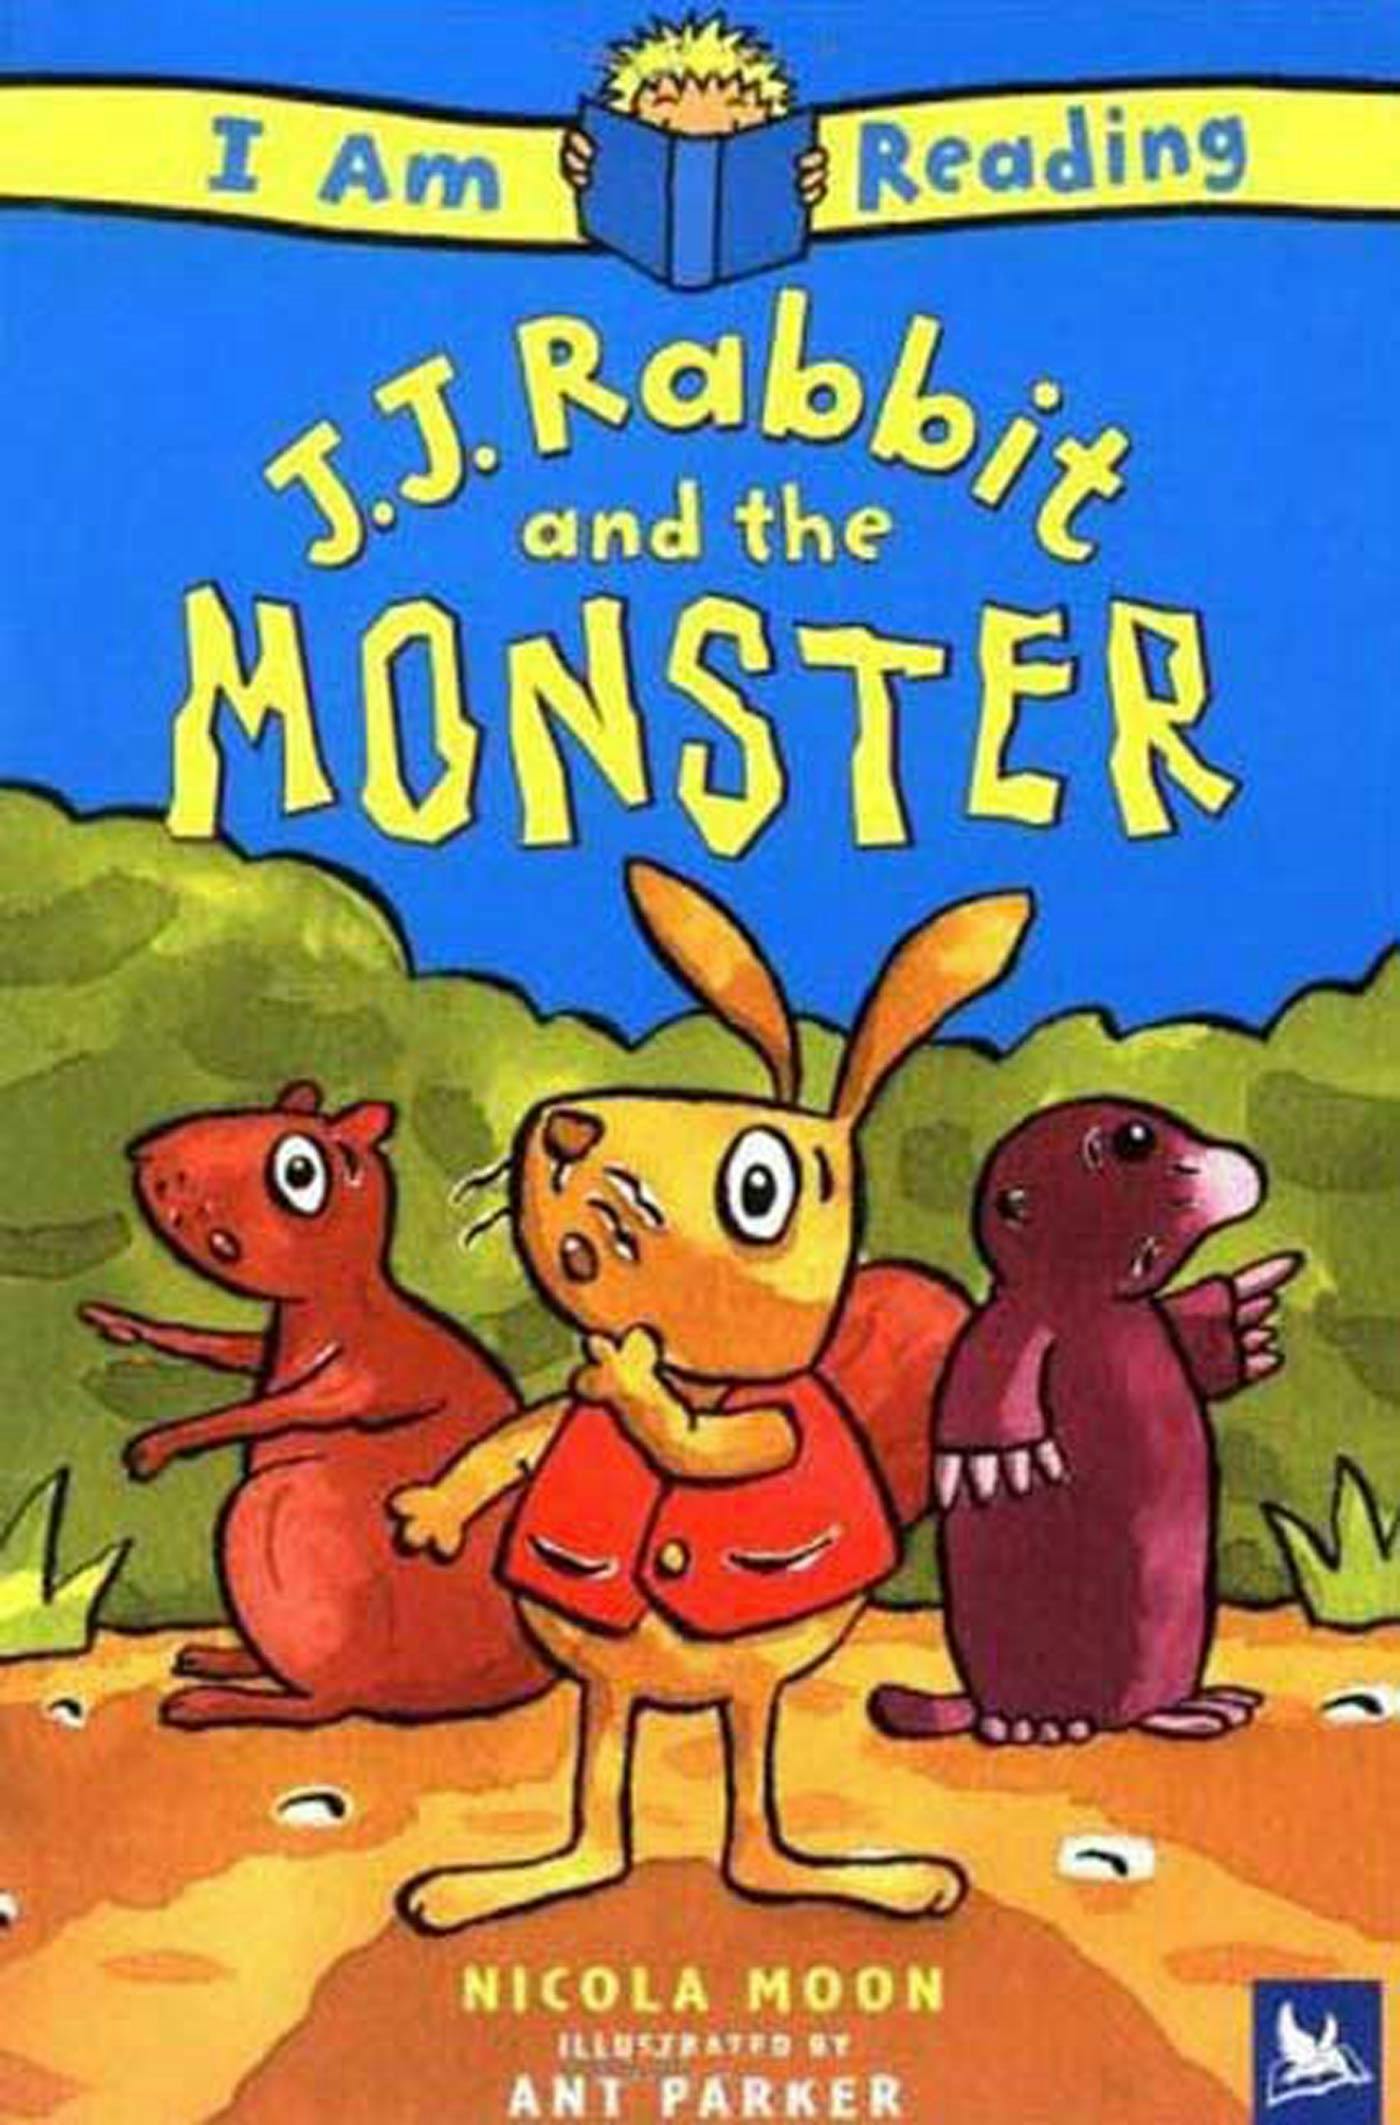 Image of I Am Reading: J.J. Rabbit and the Monster